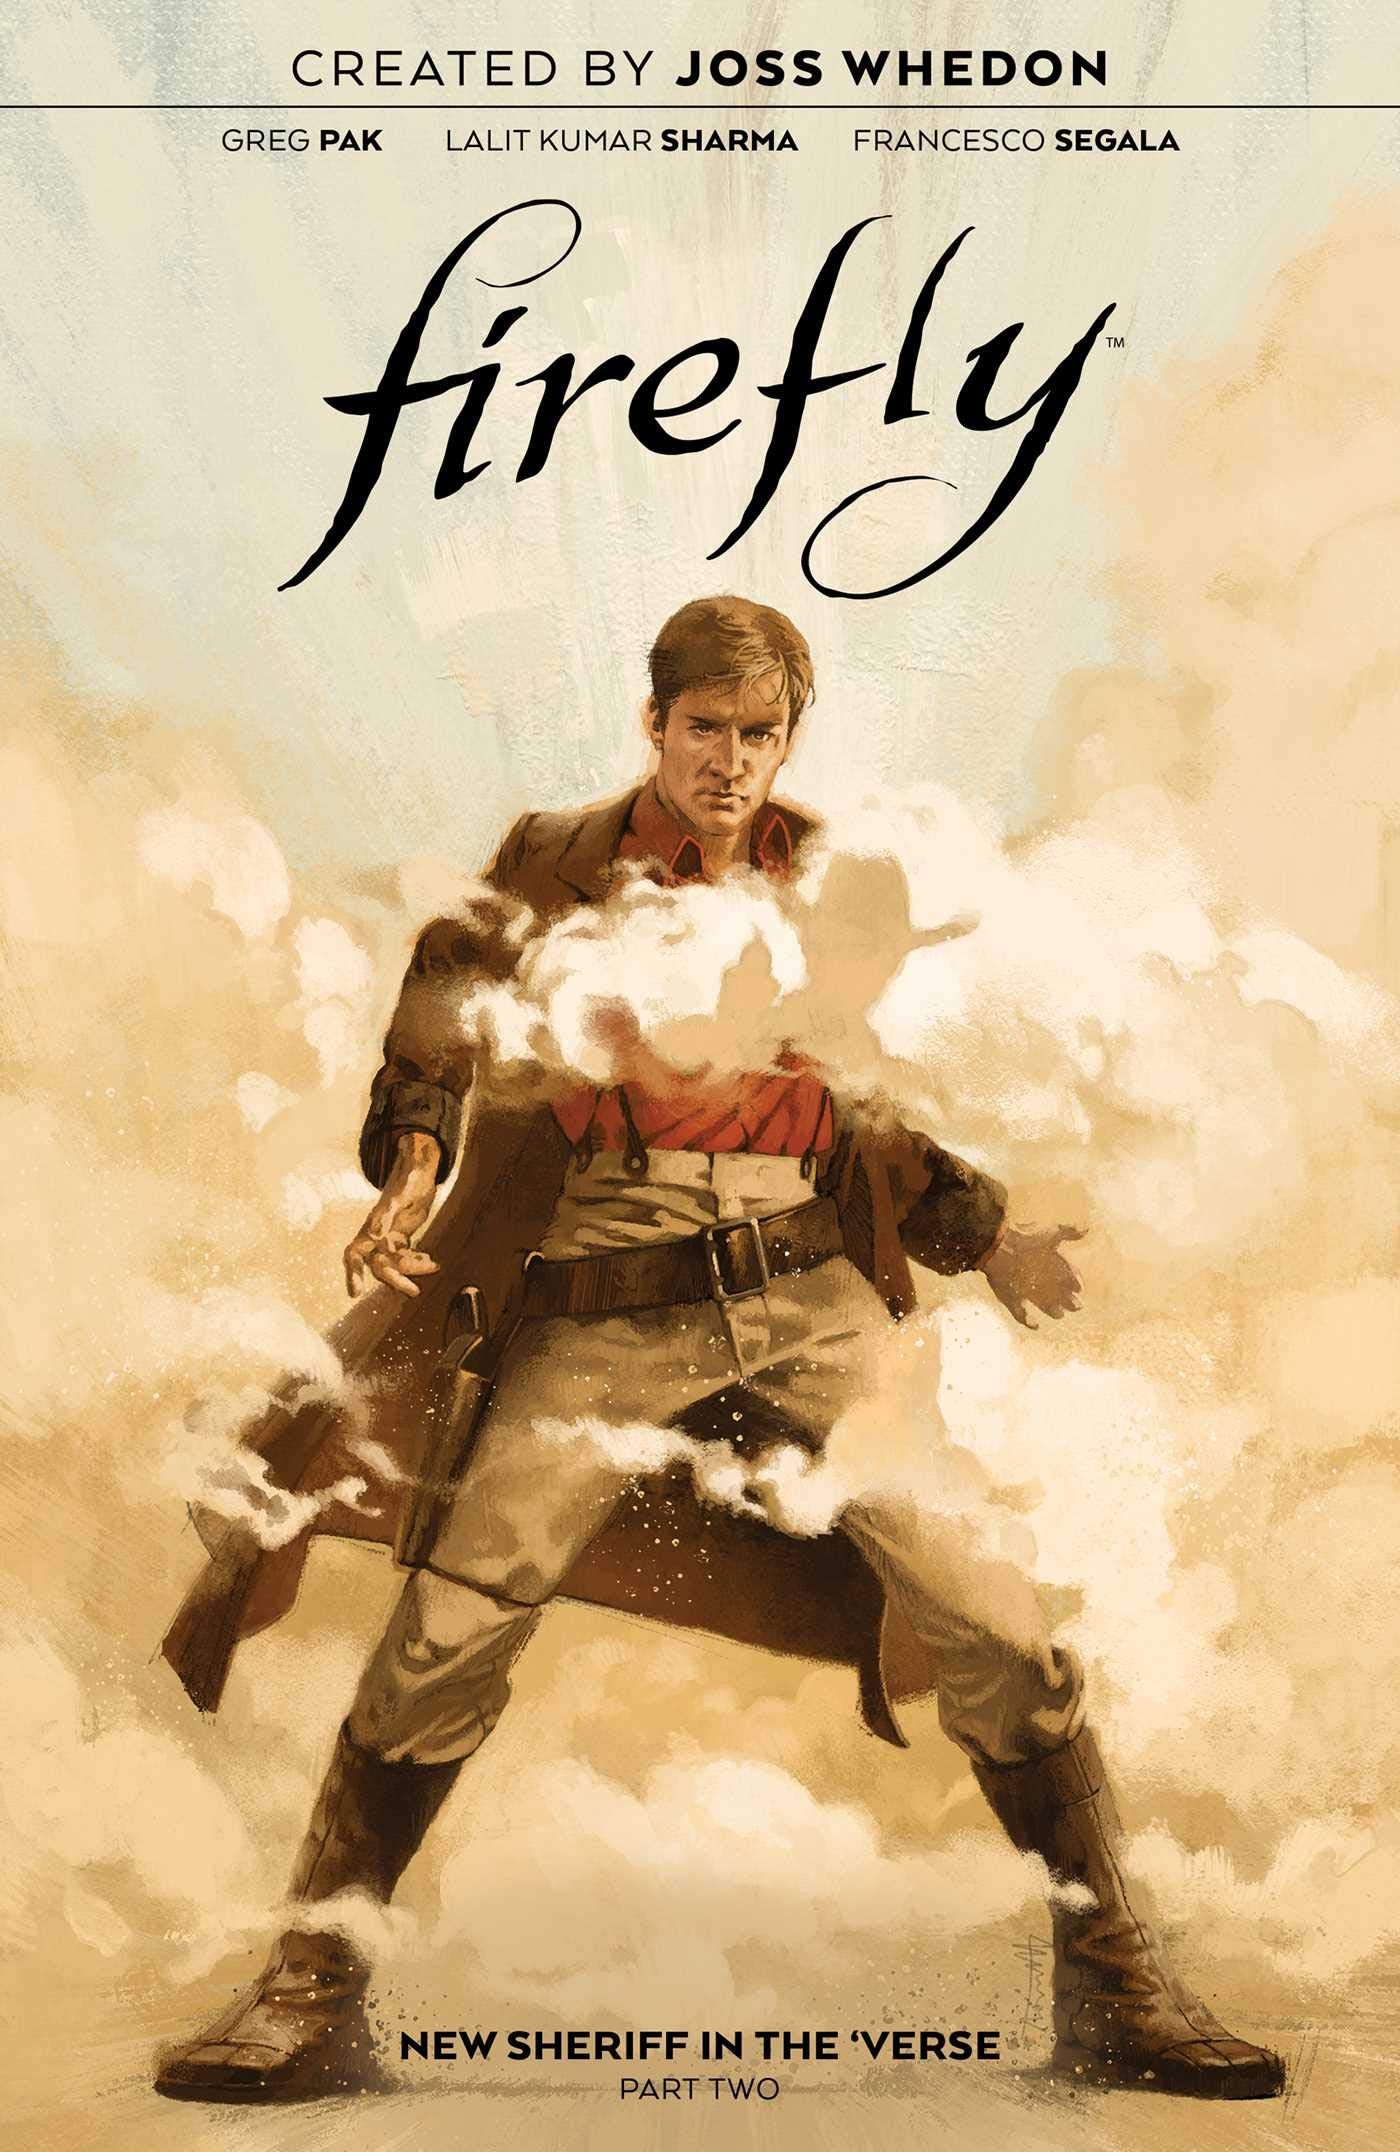 Firefly: New Sheriff in the 'Verse Volume Two